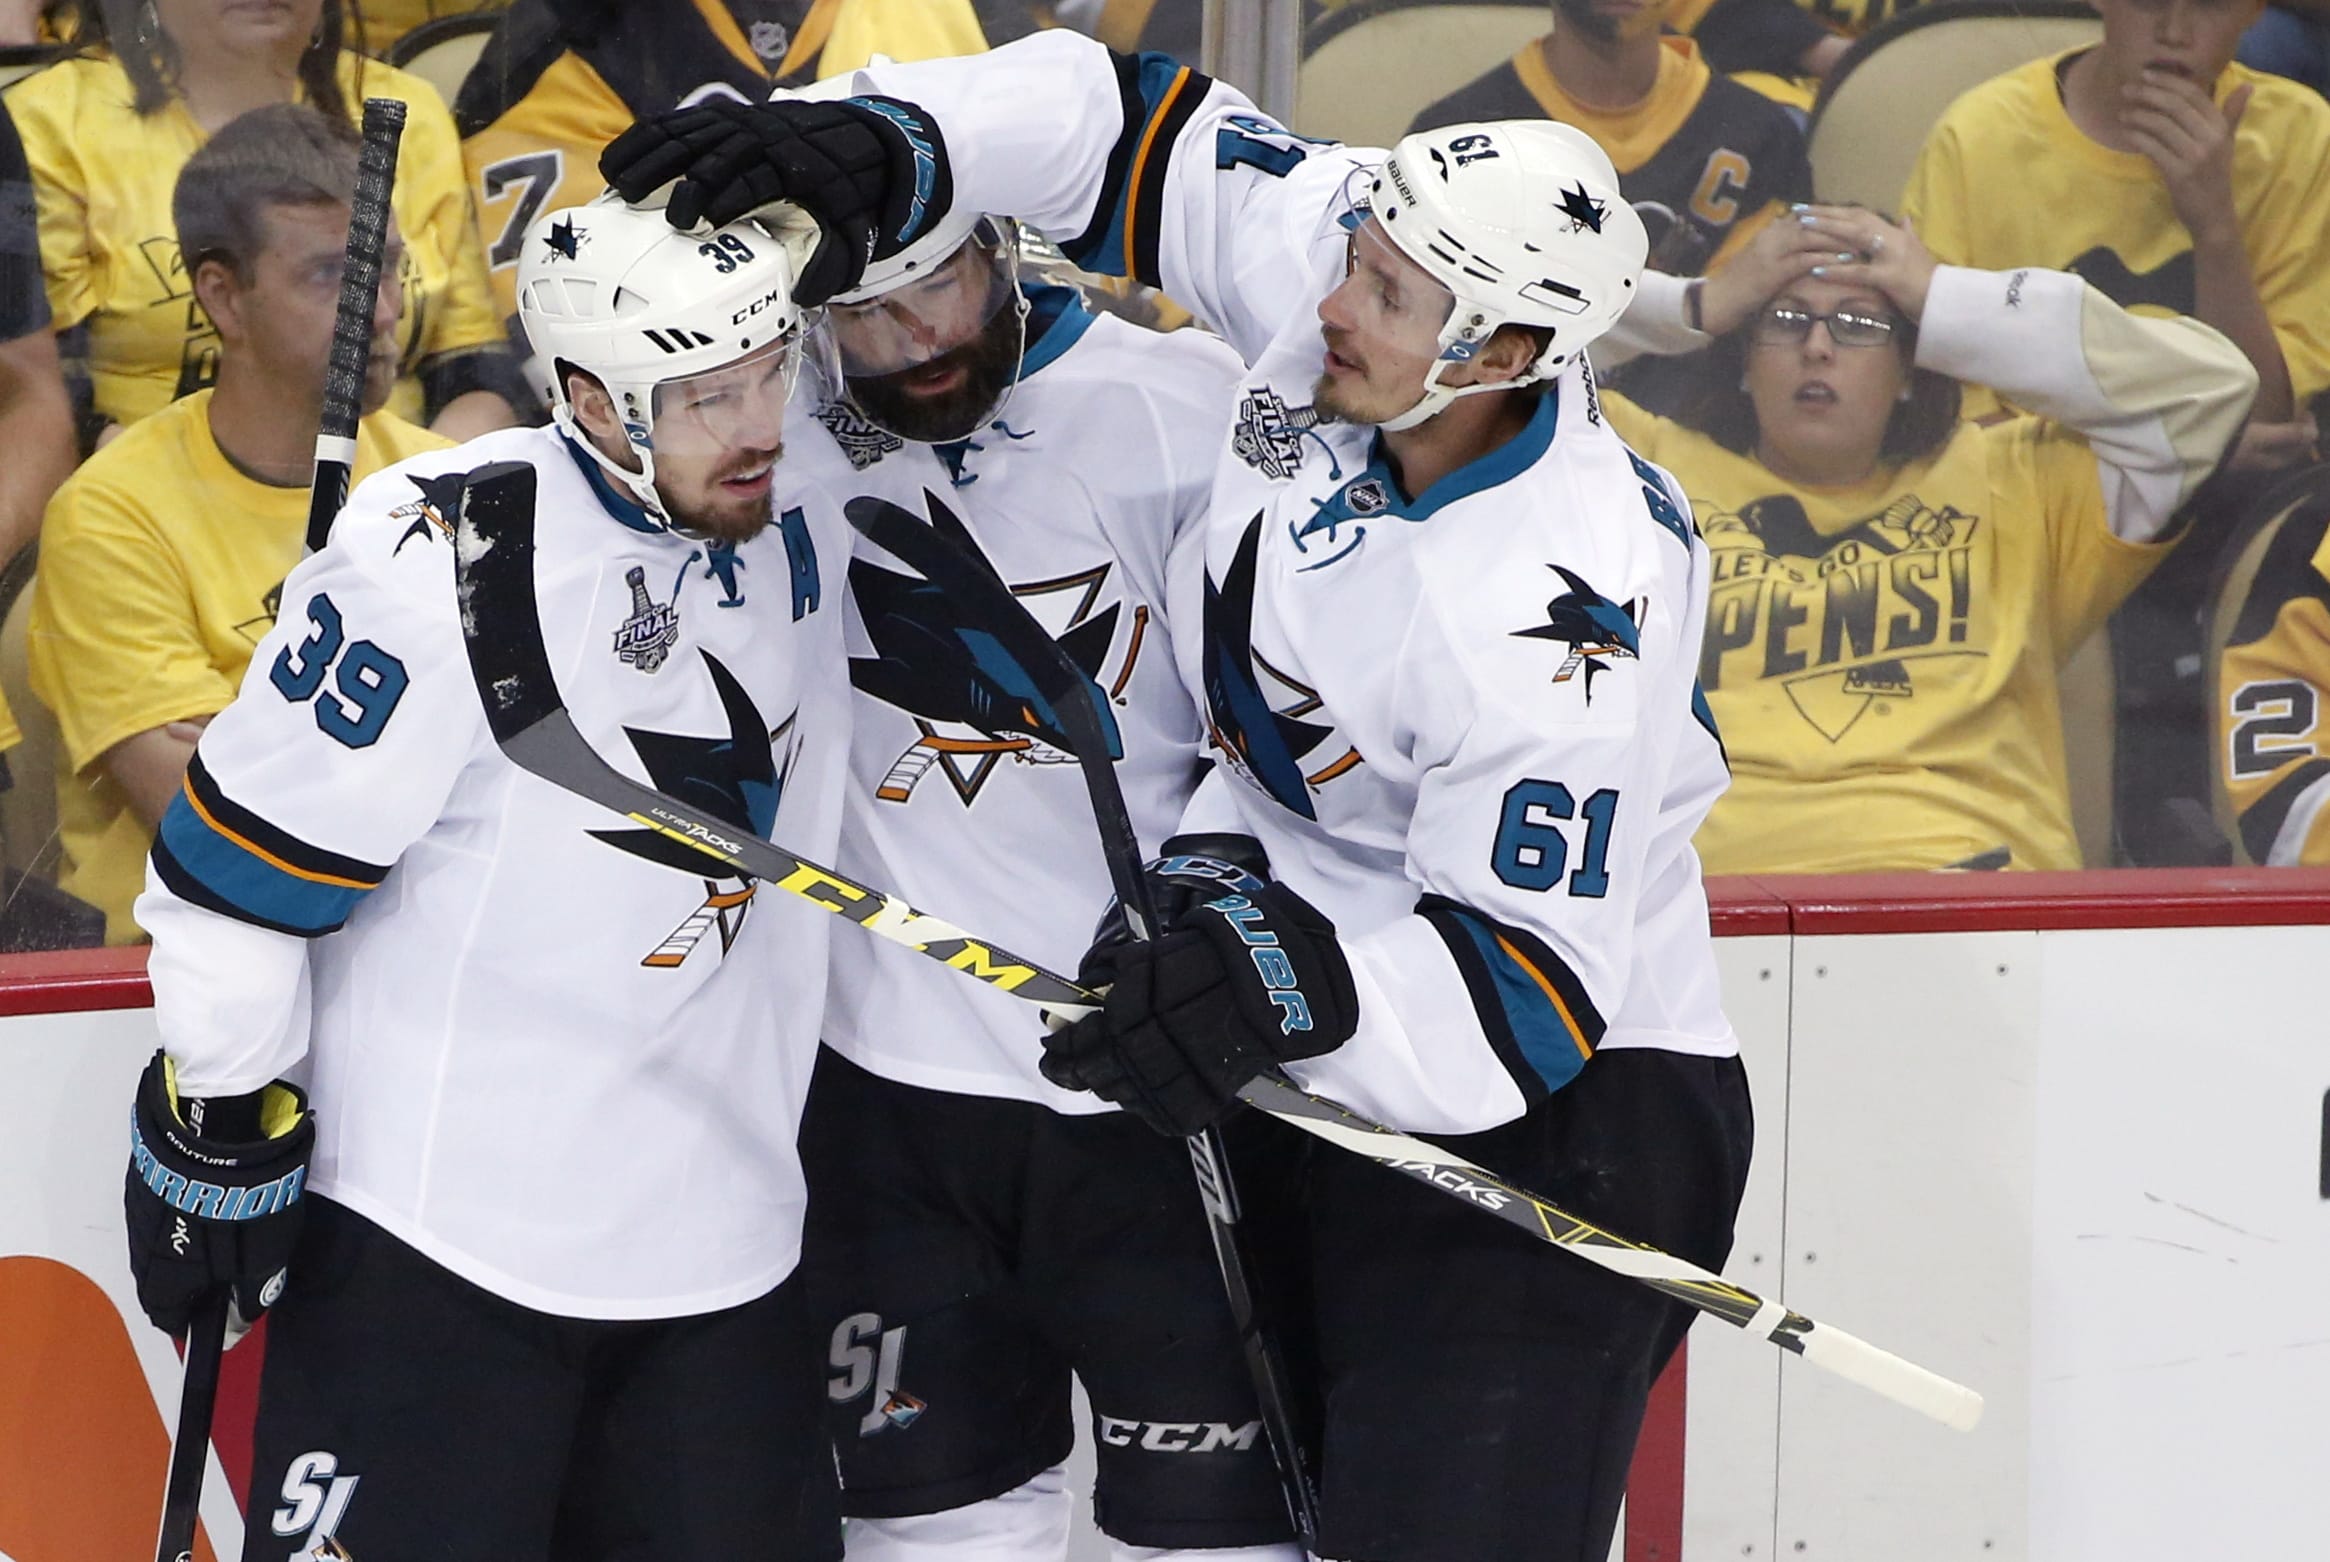 San Jose Sharks' Logan Couture (39) celebrates his goal against the Pittsburgh Penguins with teammates during the first period in Game 5 of the NHL hockey Stanley Cup Finals on Thursday, June 9, 2016, in Pittsburgh. (AP Photo/Gene J.